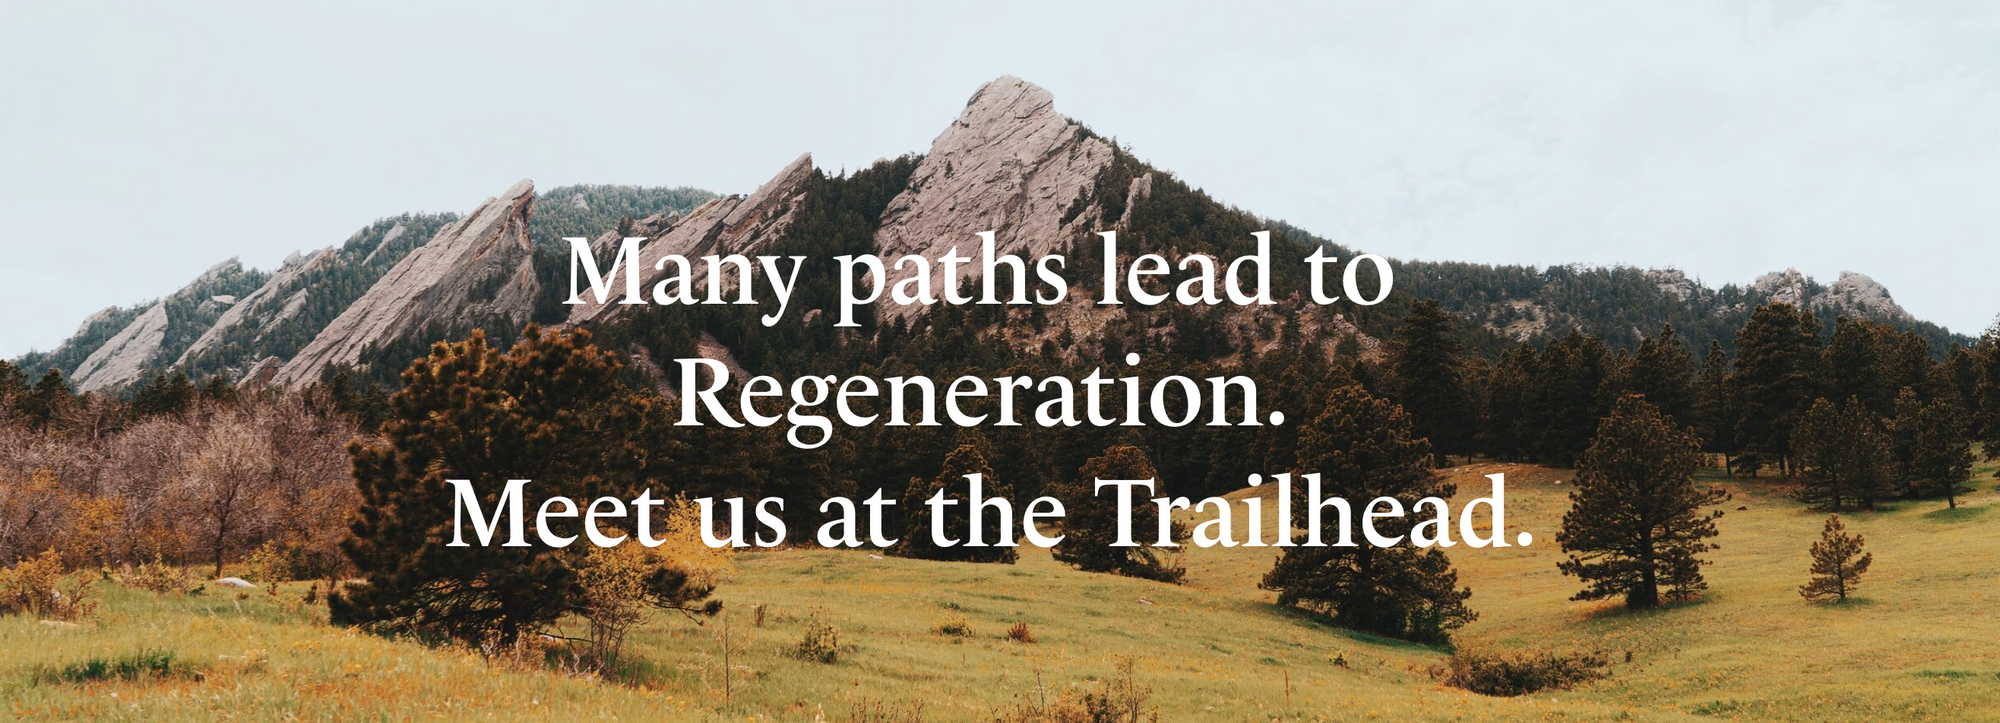 Photograph of small mountainous terrain with a headline overlay reading, "Many paths lead to Regeneration. Meet us at the Trailhead."